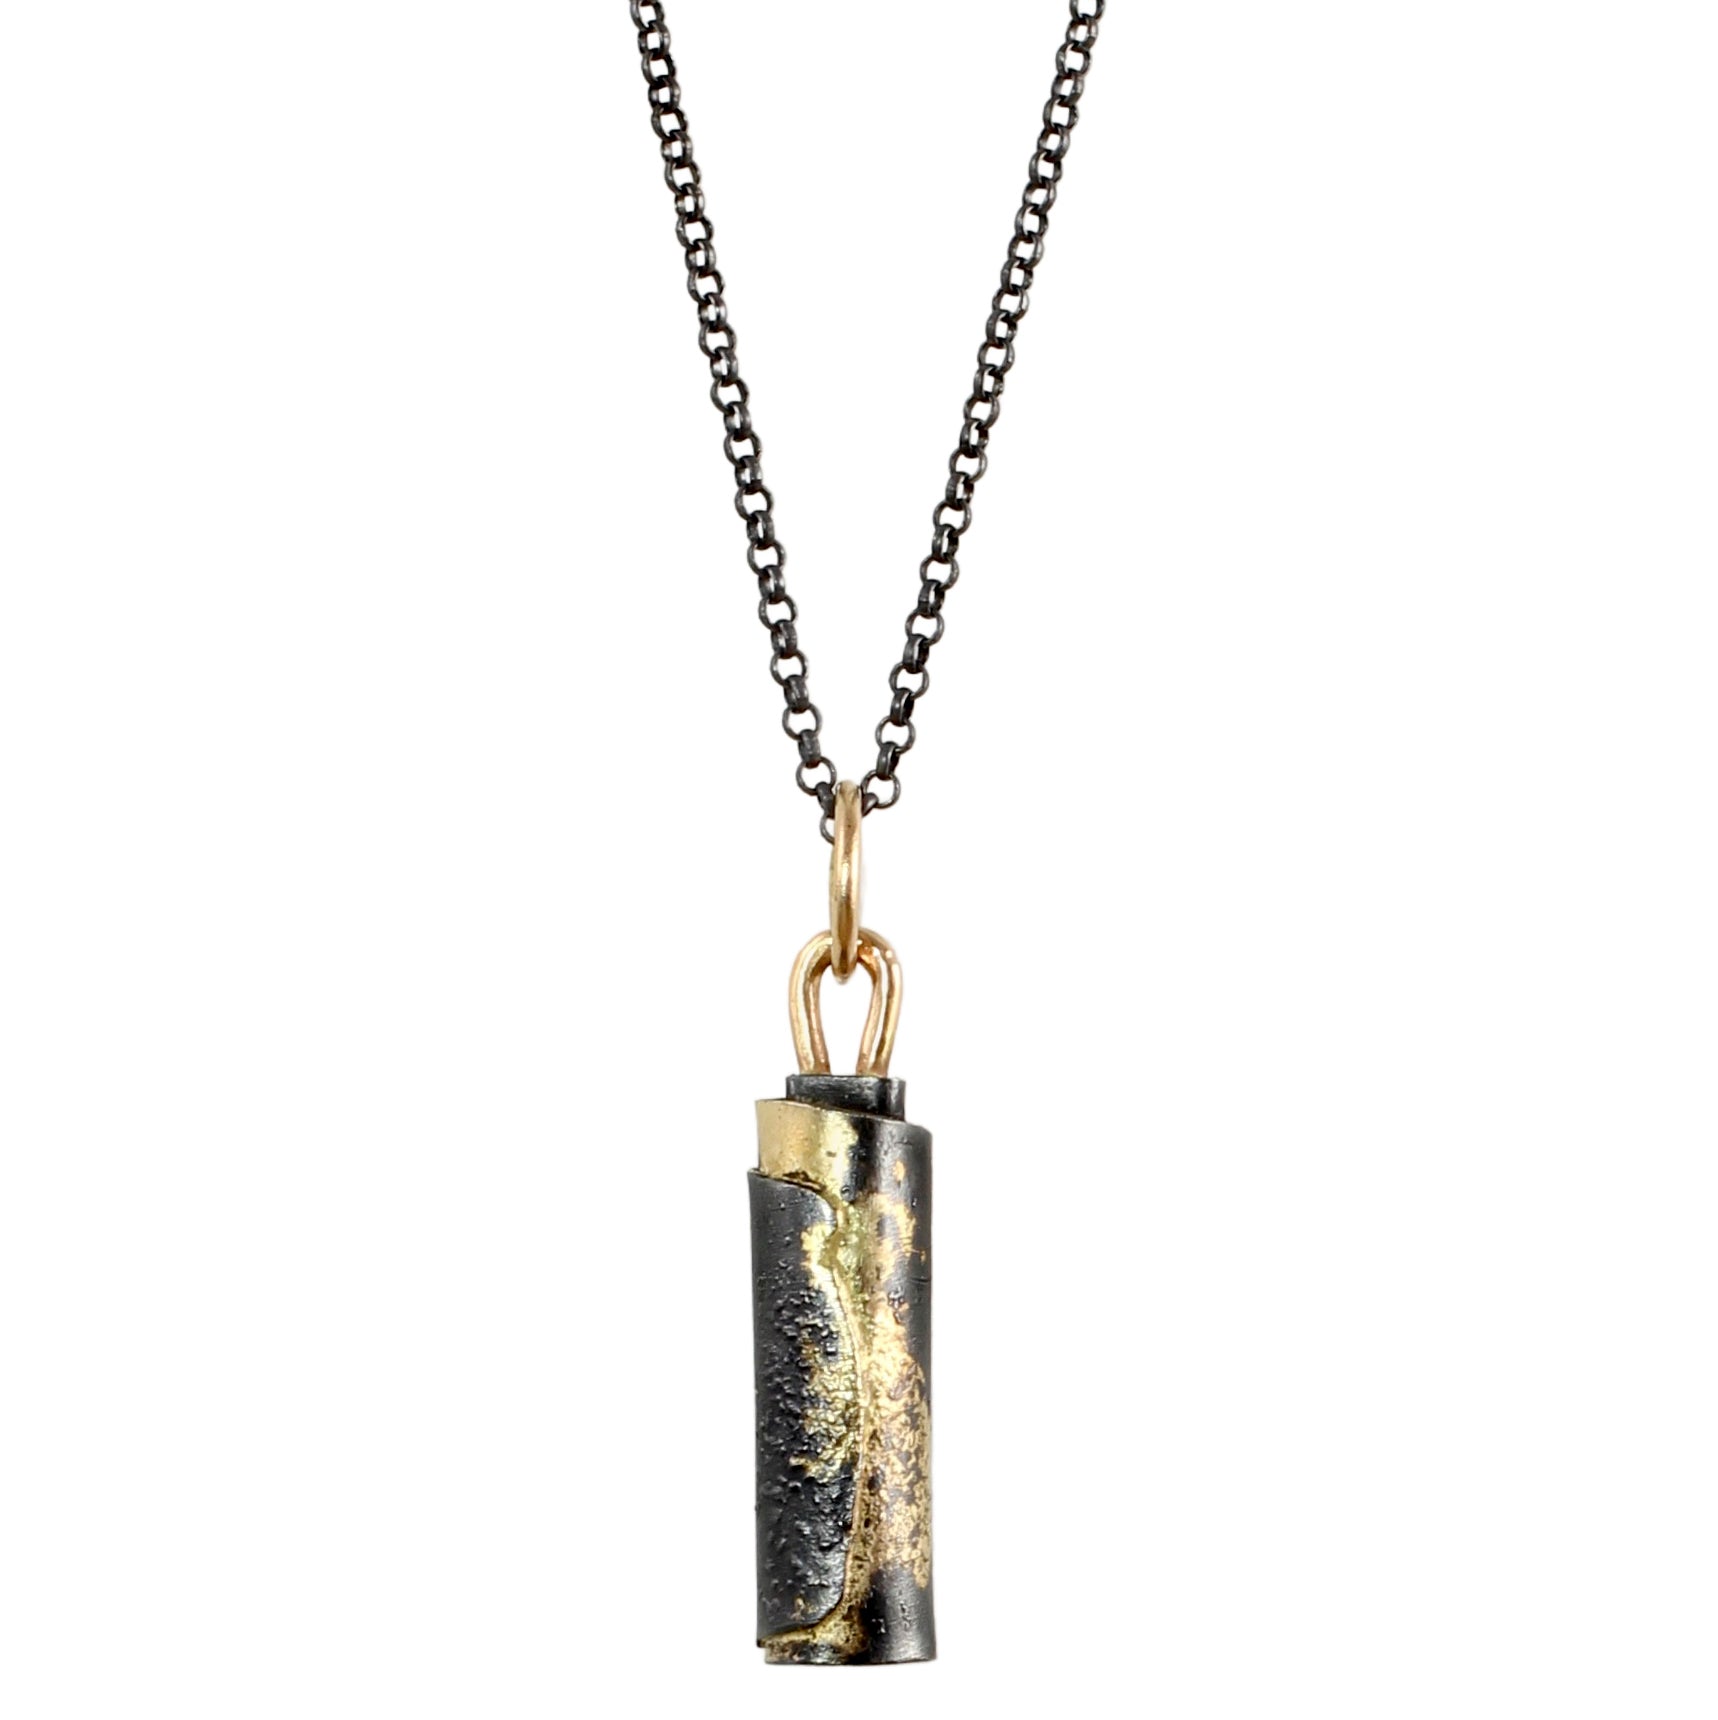 Intention Talisman Necklace or Charm with 14k Gold